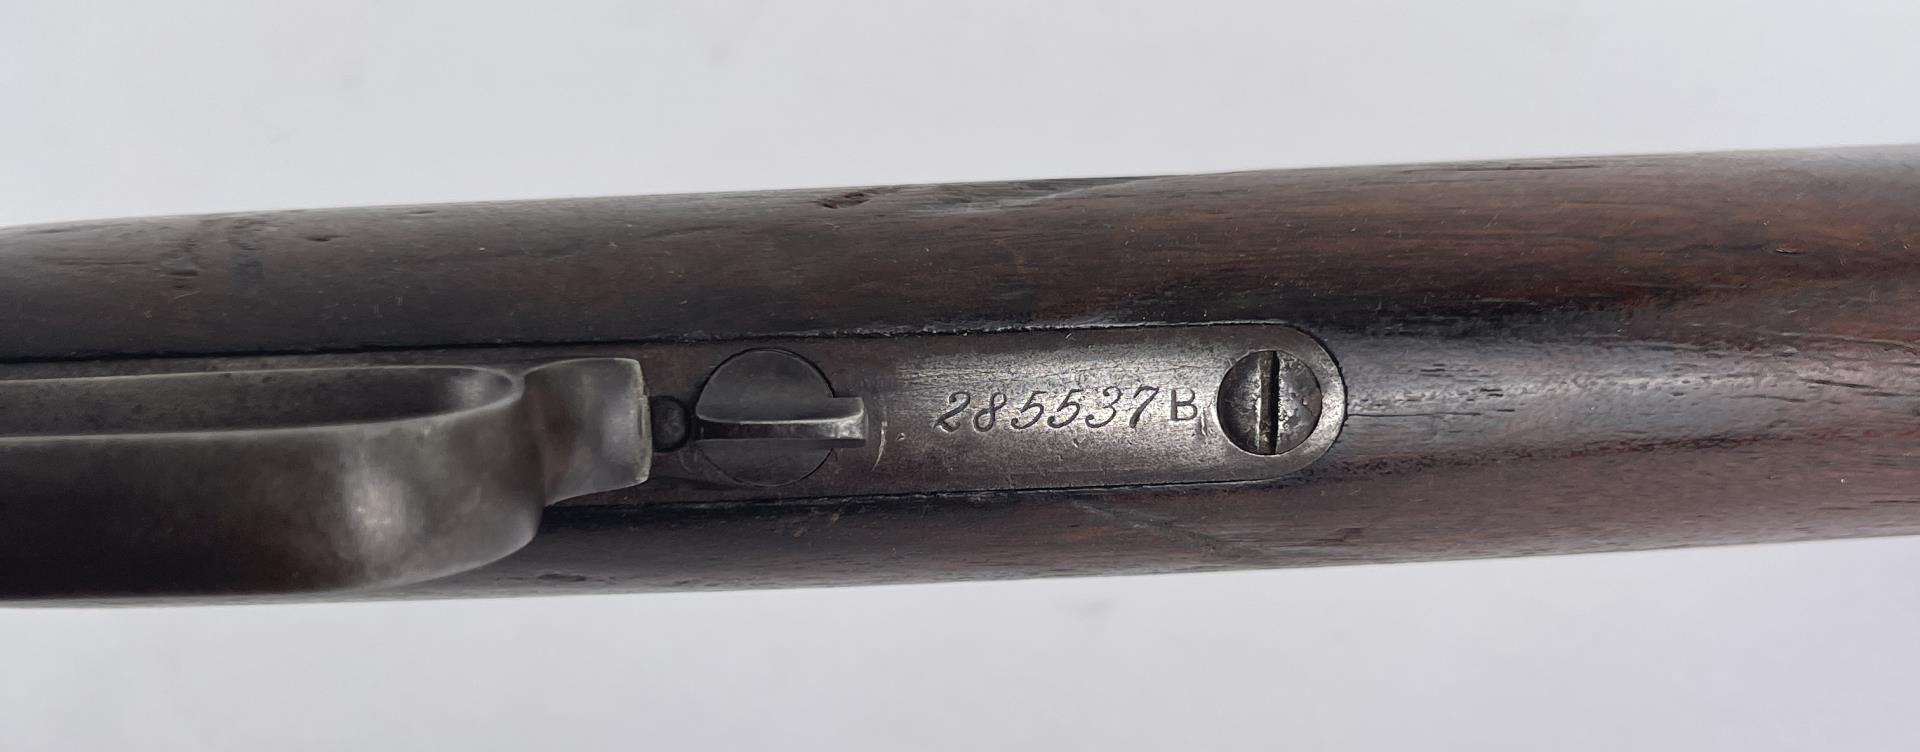 Winchester Model 1873 Rifle .32 WCF